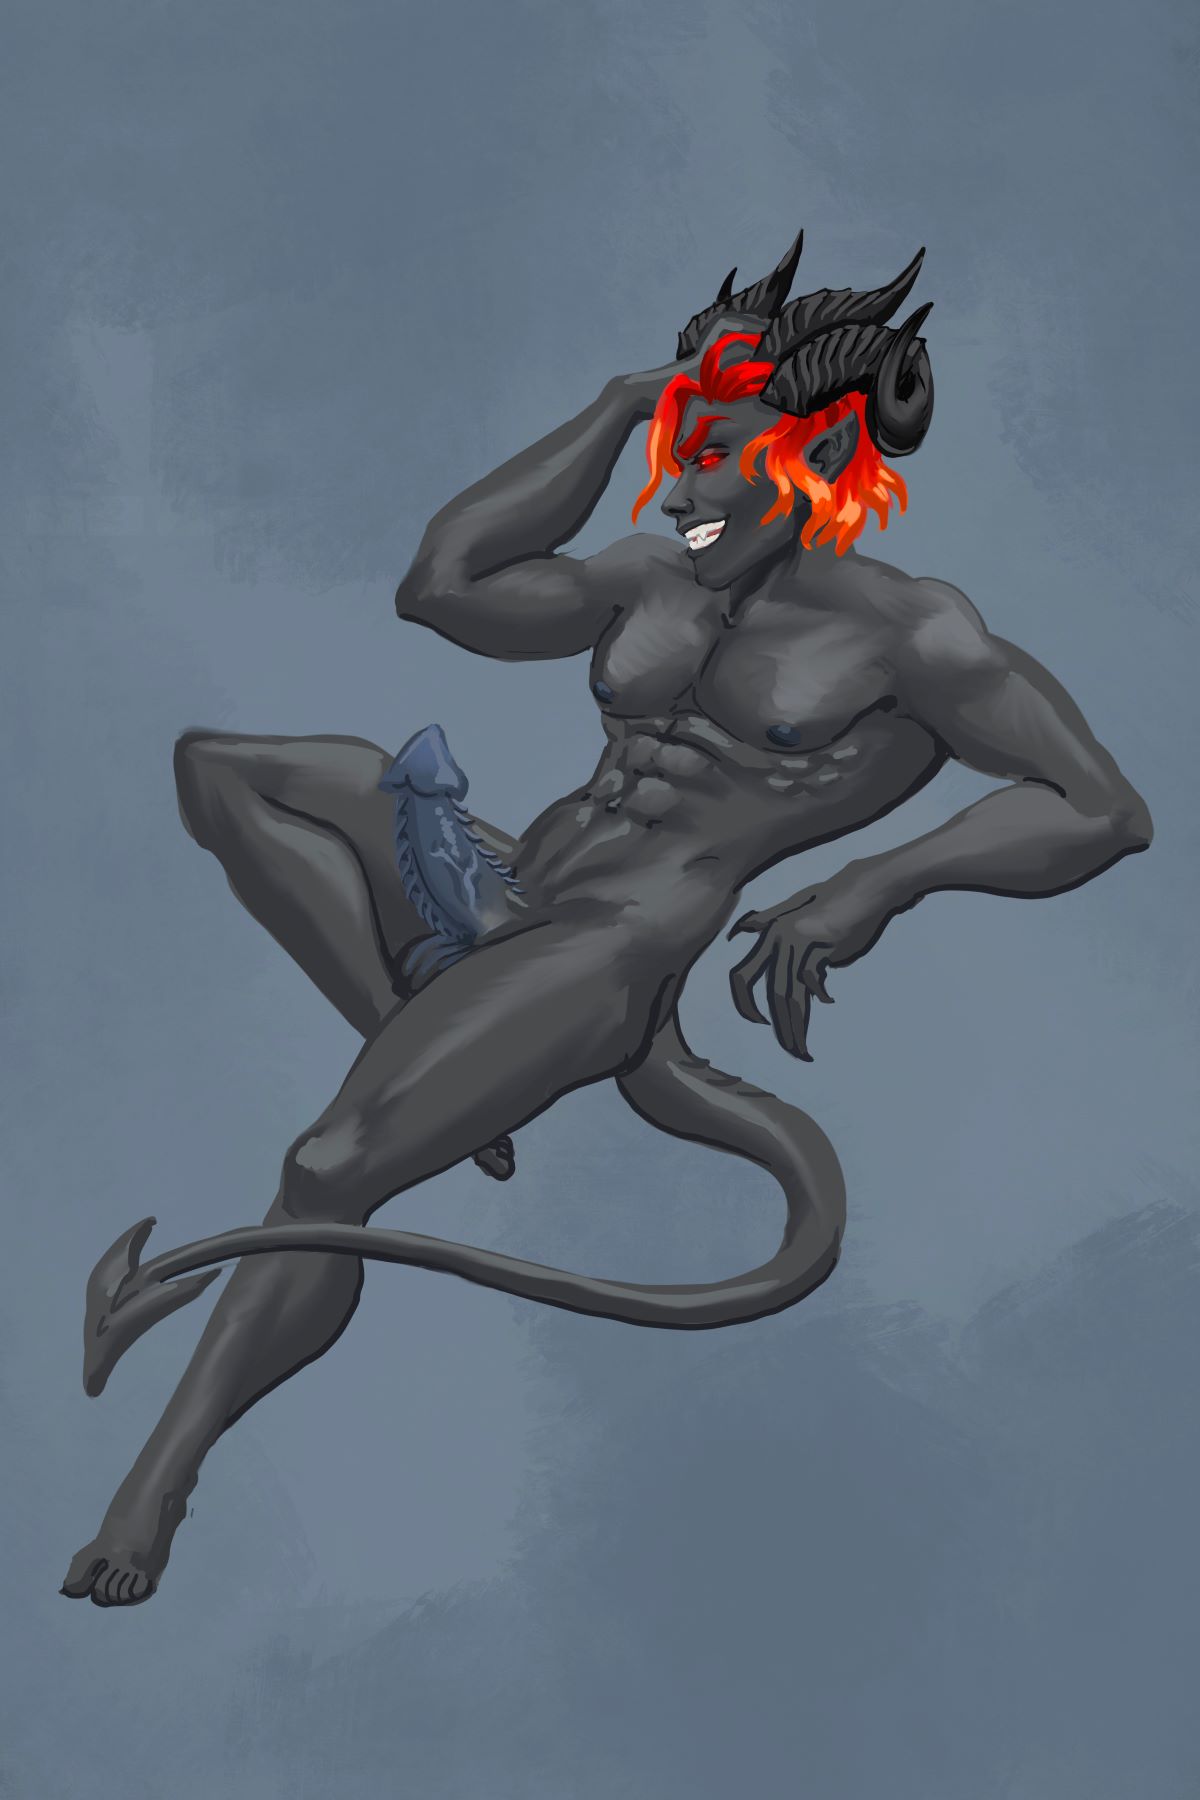 Rex the demon from take me to hell nsfw character art